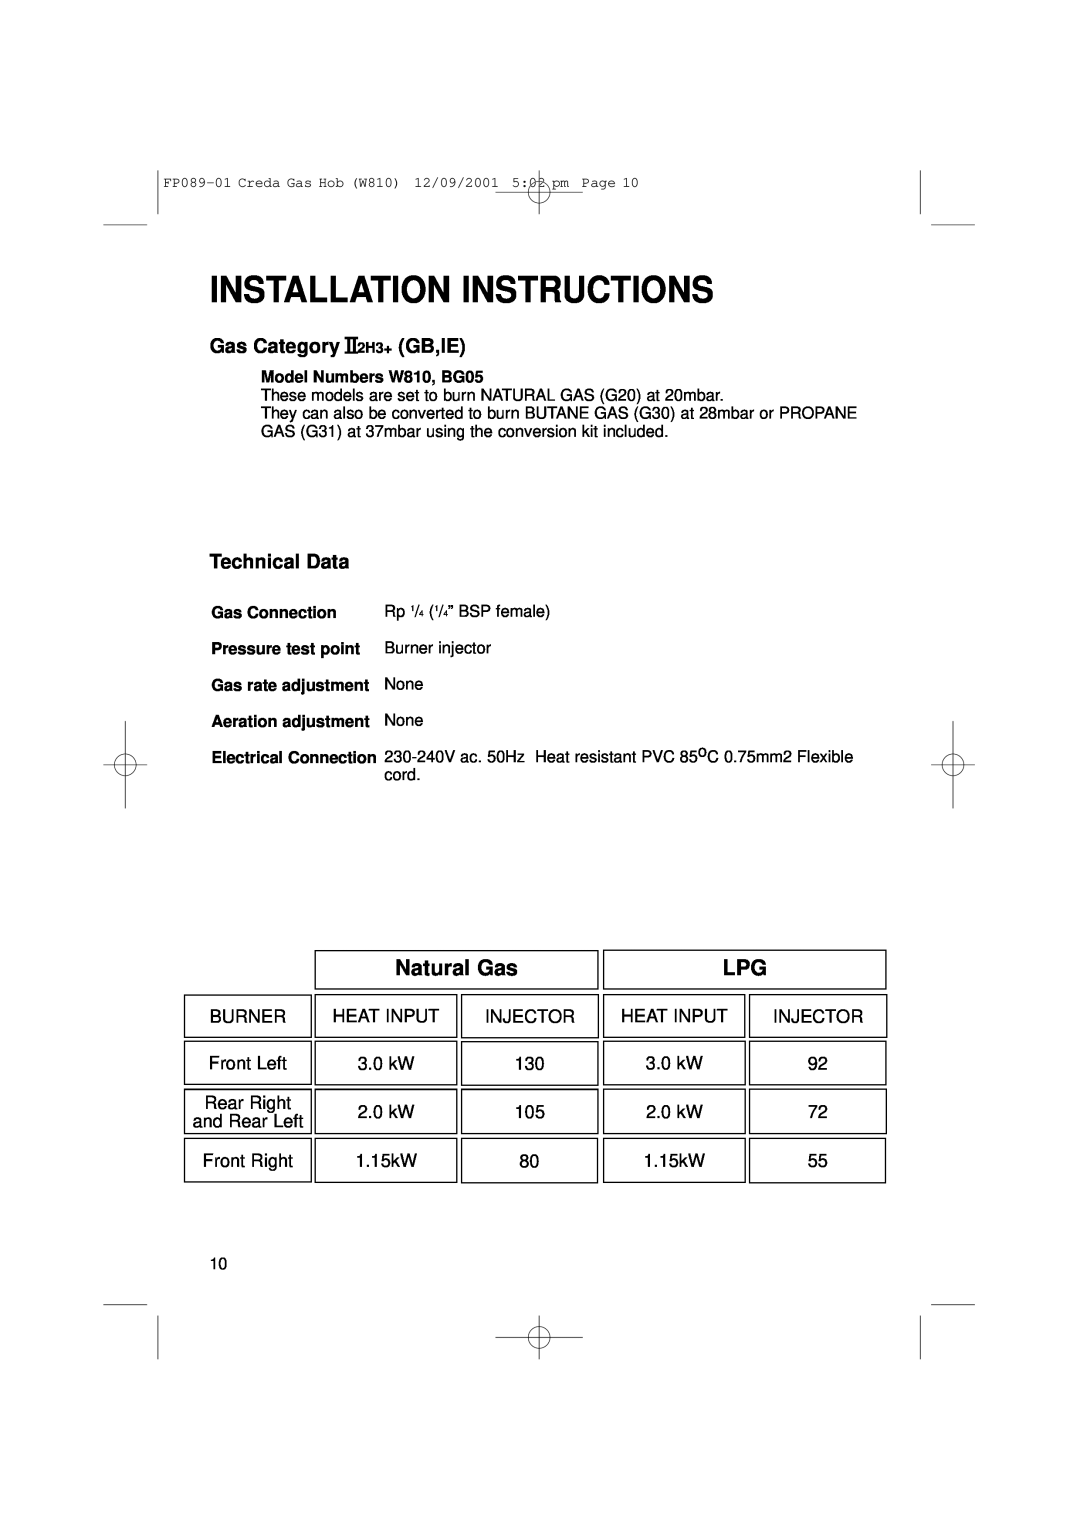 Creda manual Installation Instructions, Natural Gas, Gas Category II2H3+ GB,IE, Technical Data, Model Numbers W810, BG05 